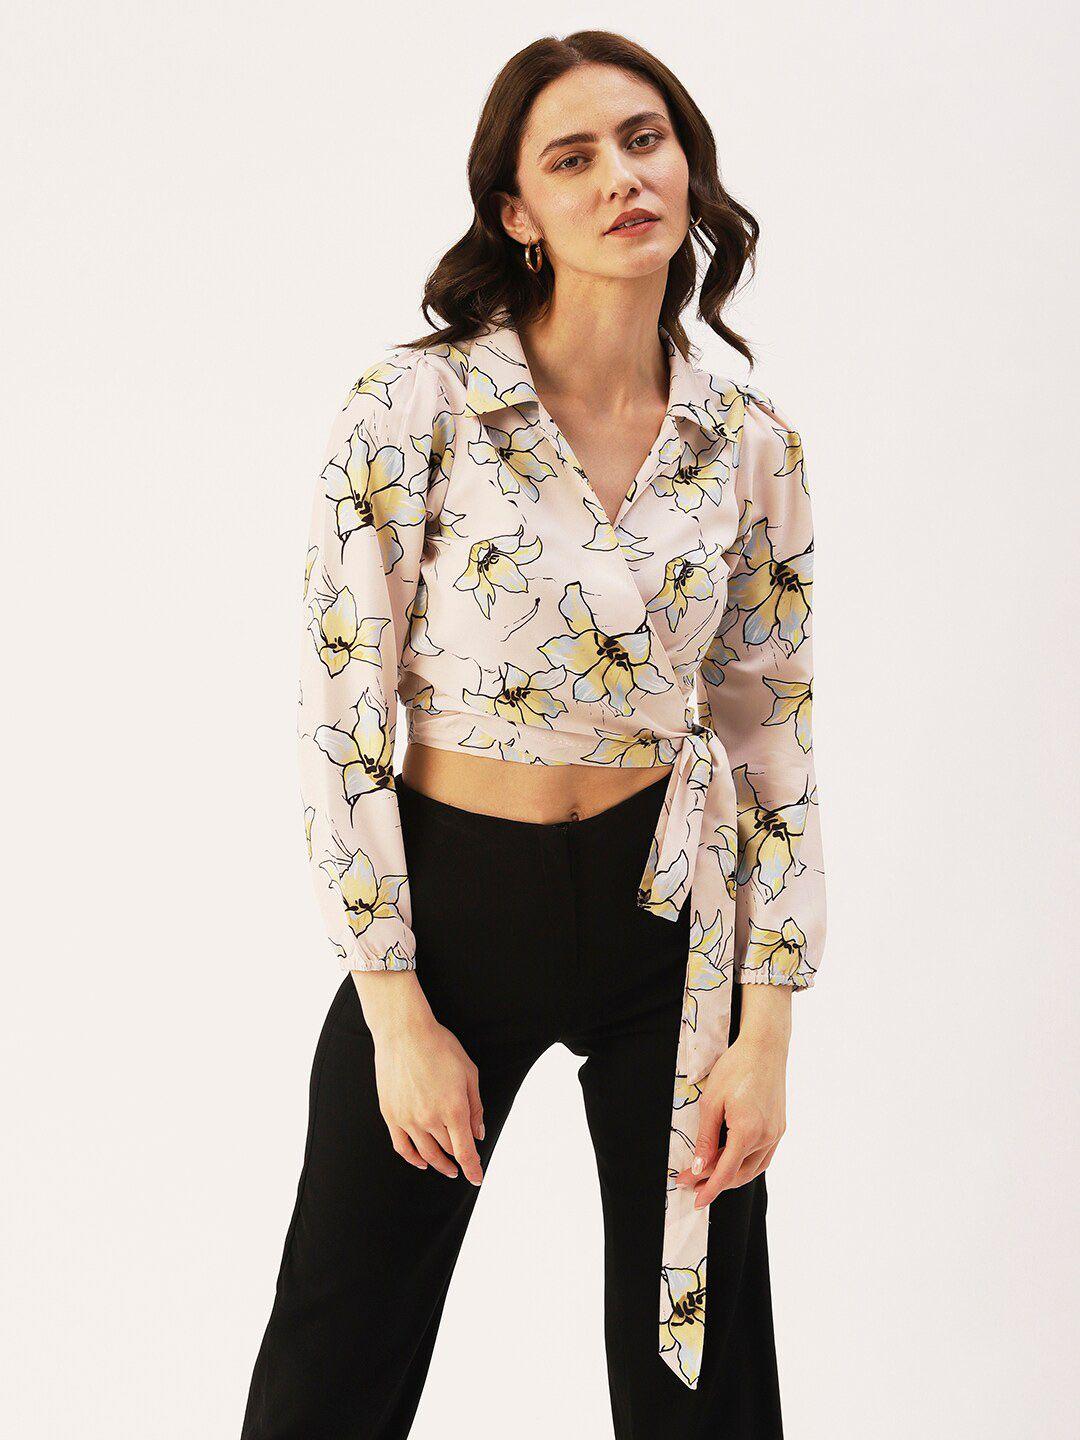 dressberry women floral printed shirt style crop top